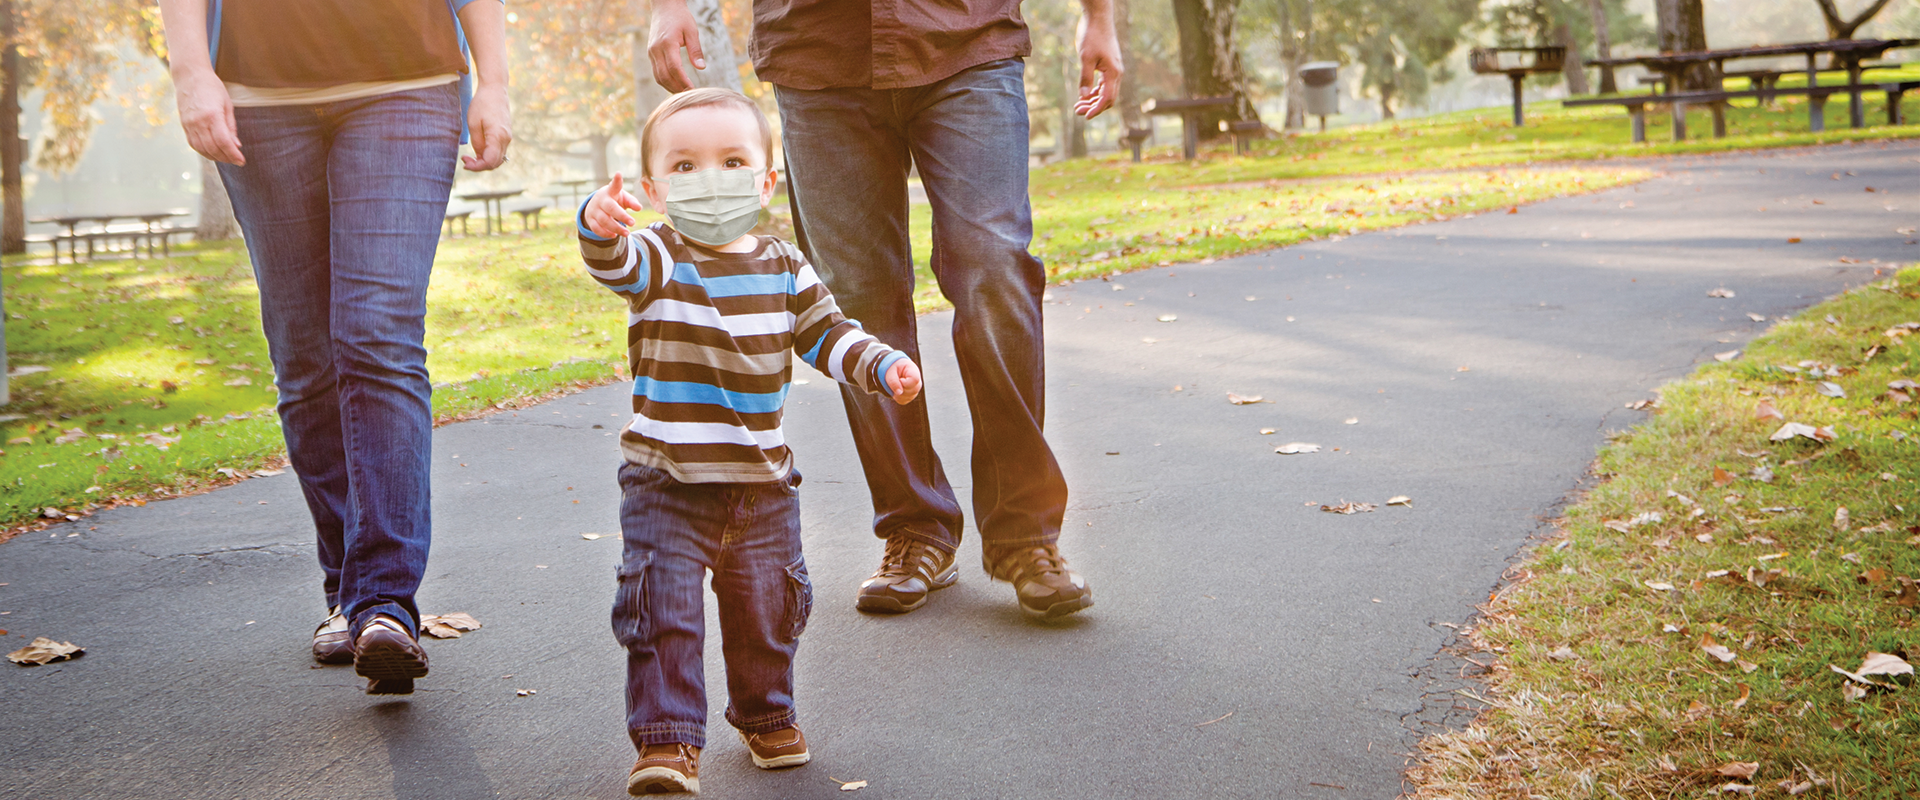 A toddler and parents with masks on walking in a park